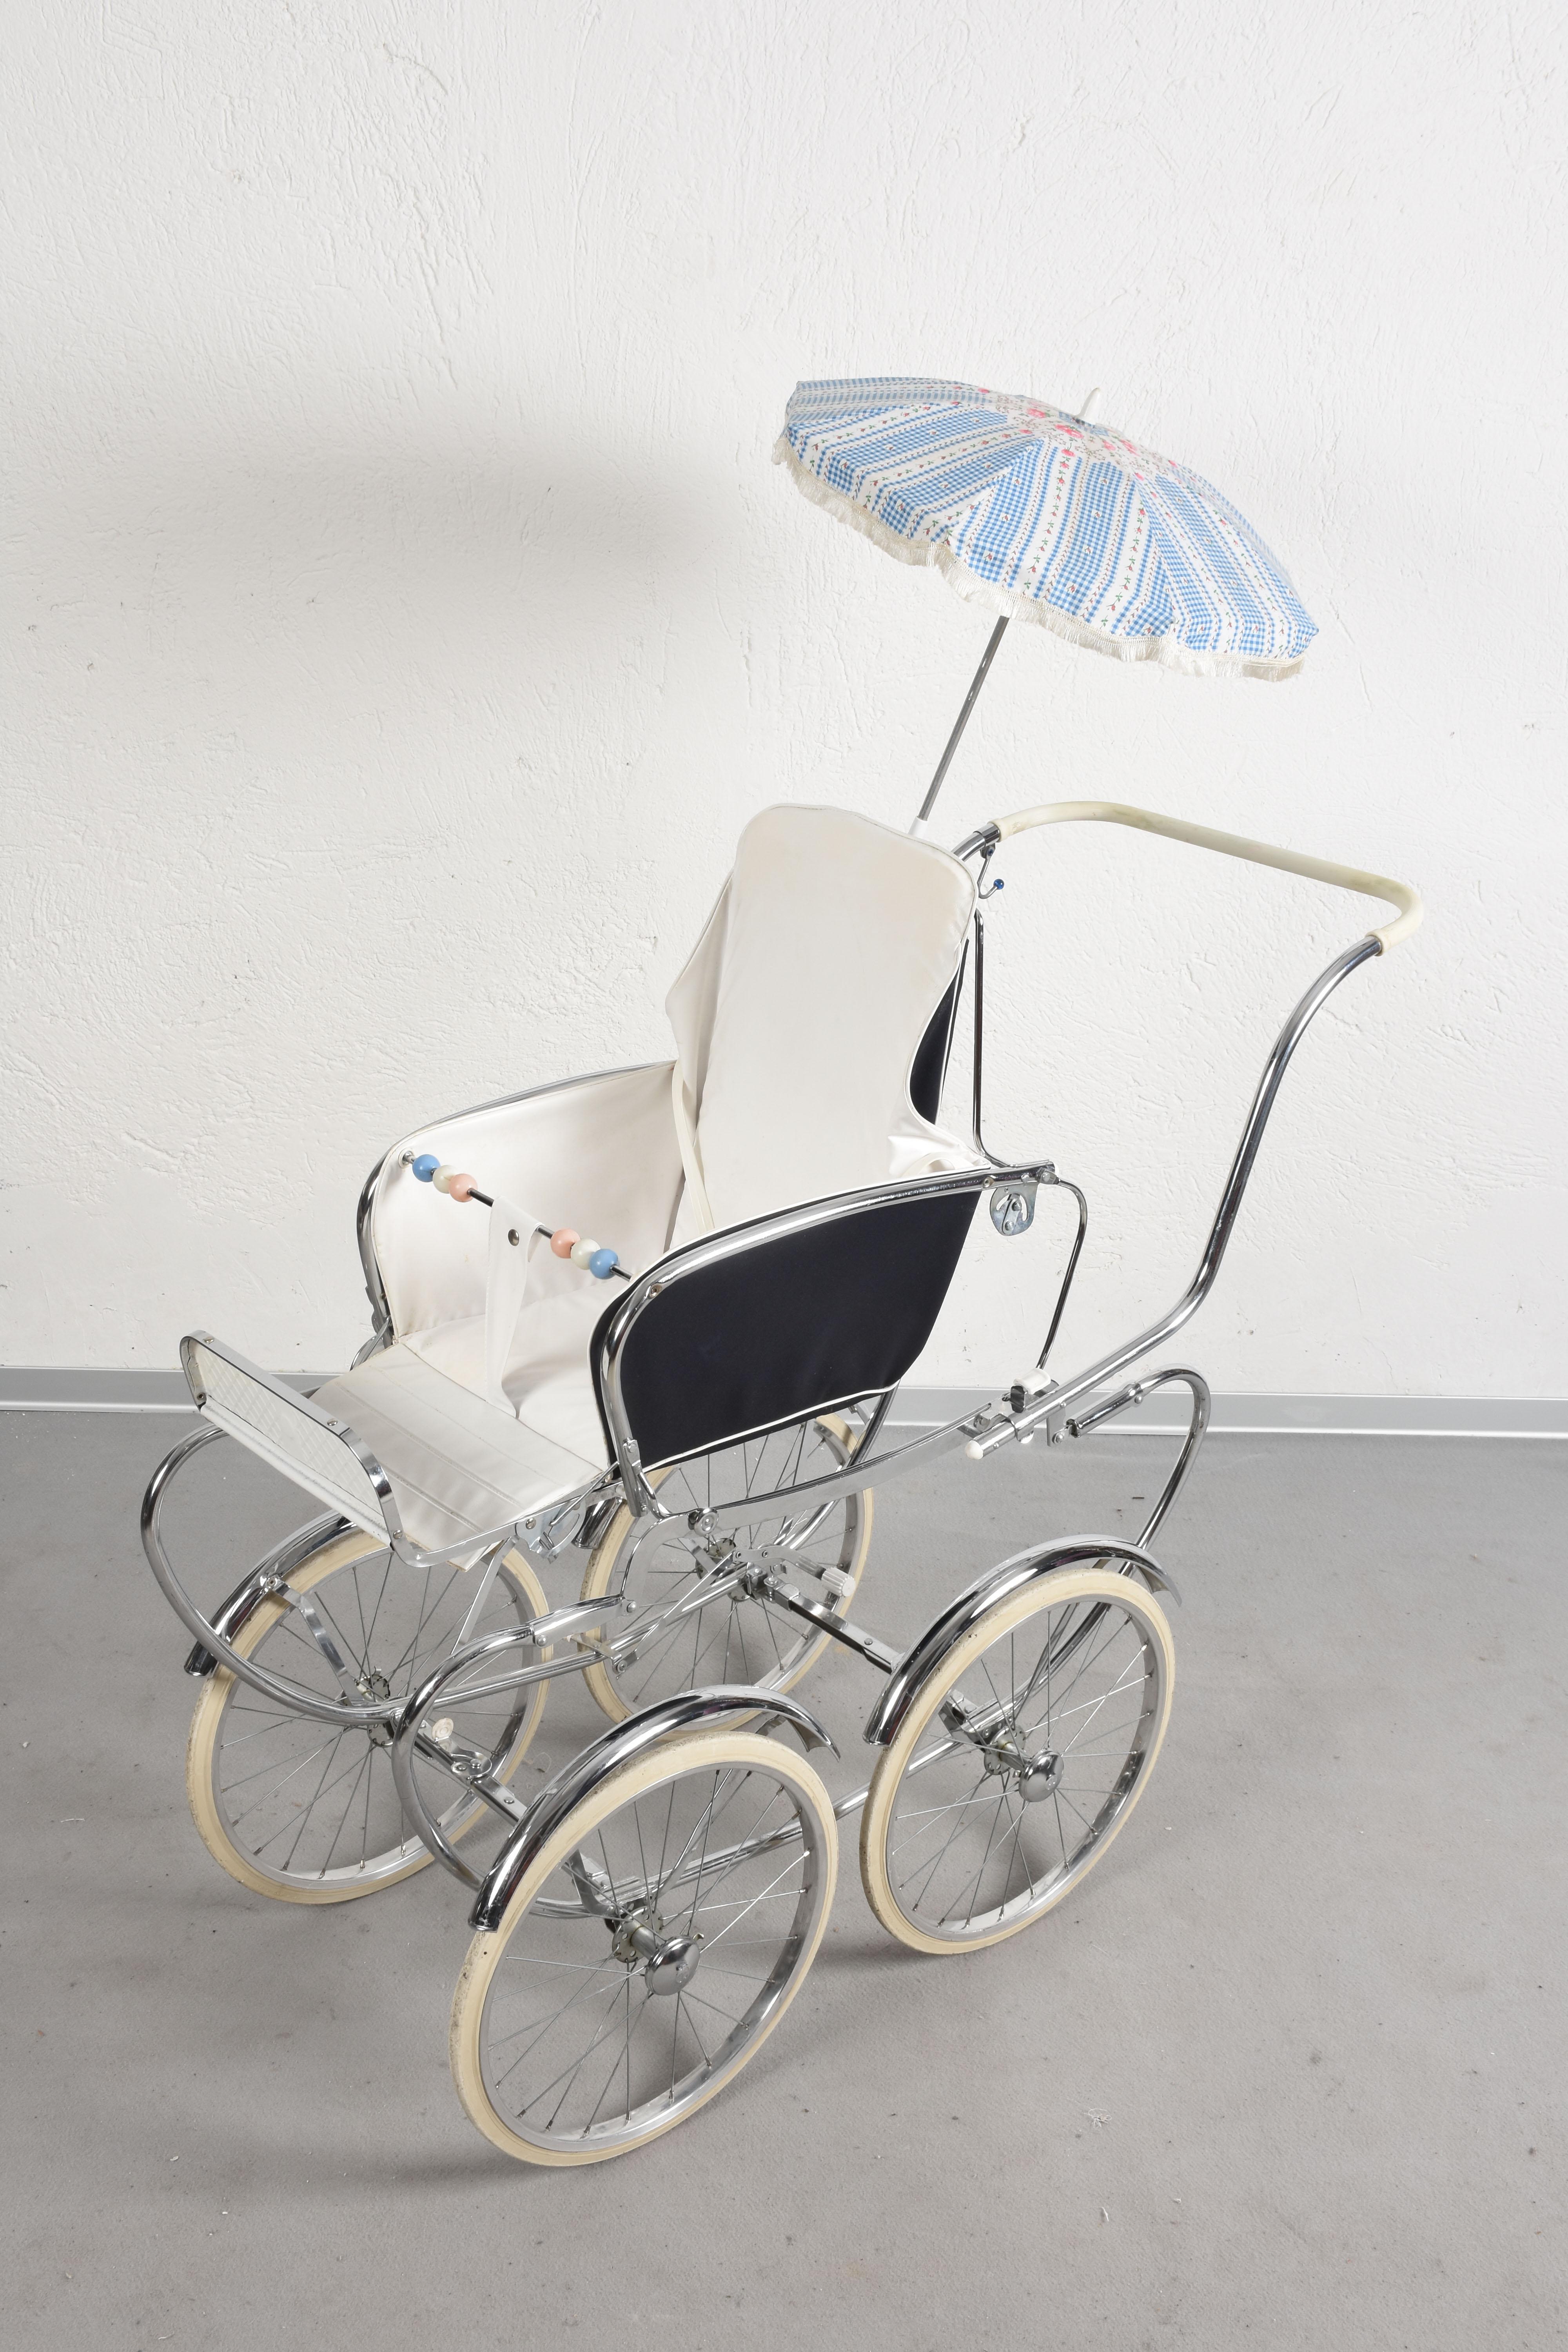 Cute midcentury steel and white fabric Italian baby pram stroller. This marvelous item was produced in Italy during the 1950s.

This pram stroller comes with a vintage umbrella, large wheels and the perfect combination between fabric and